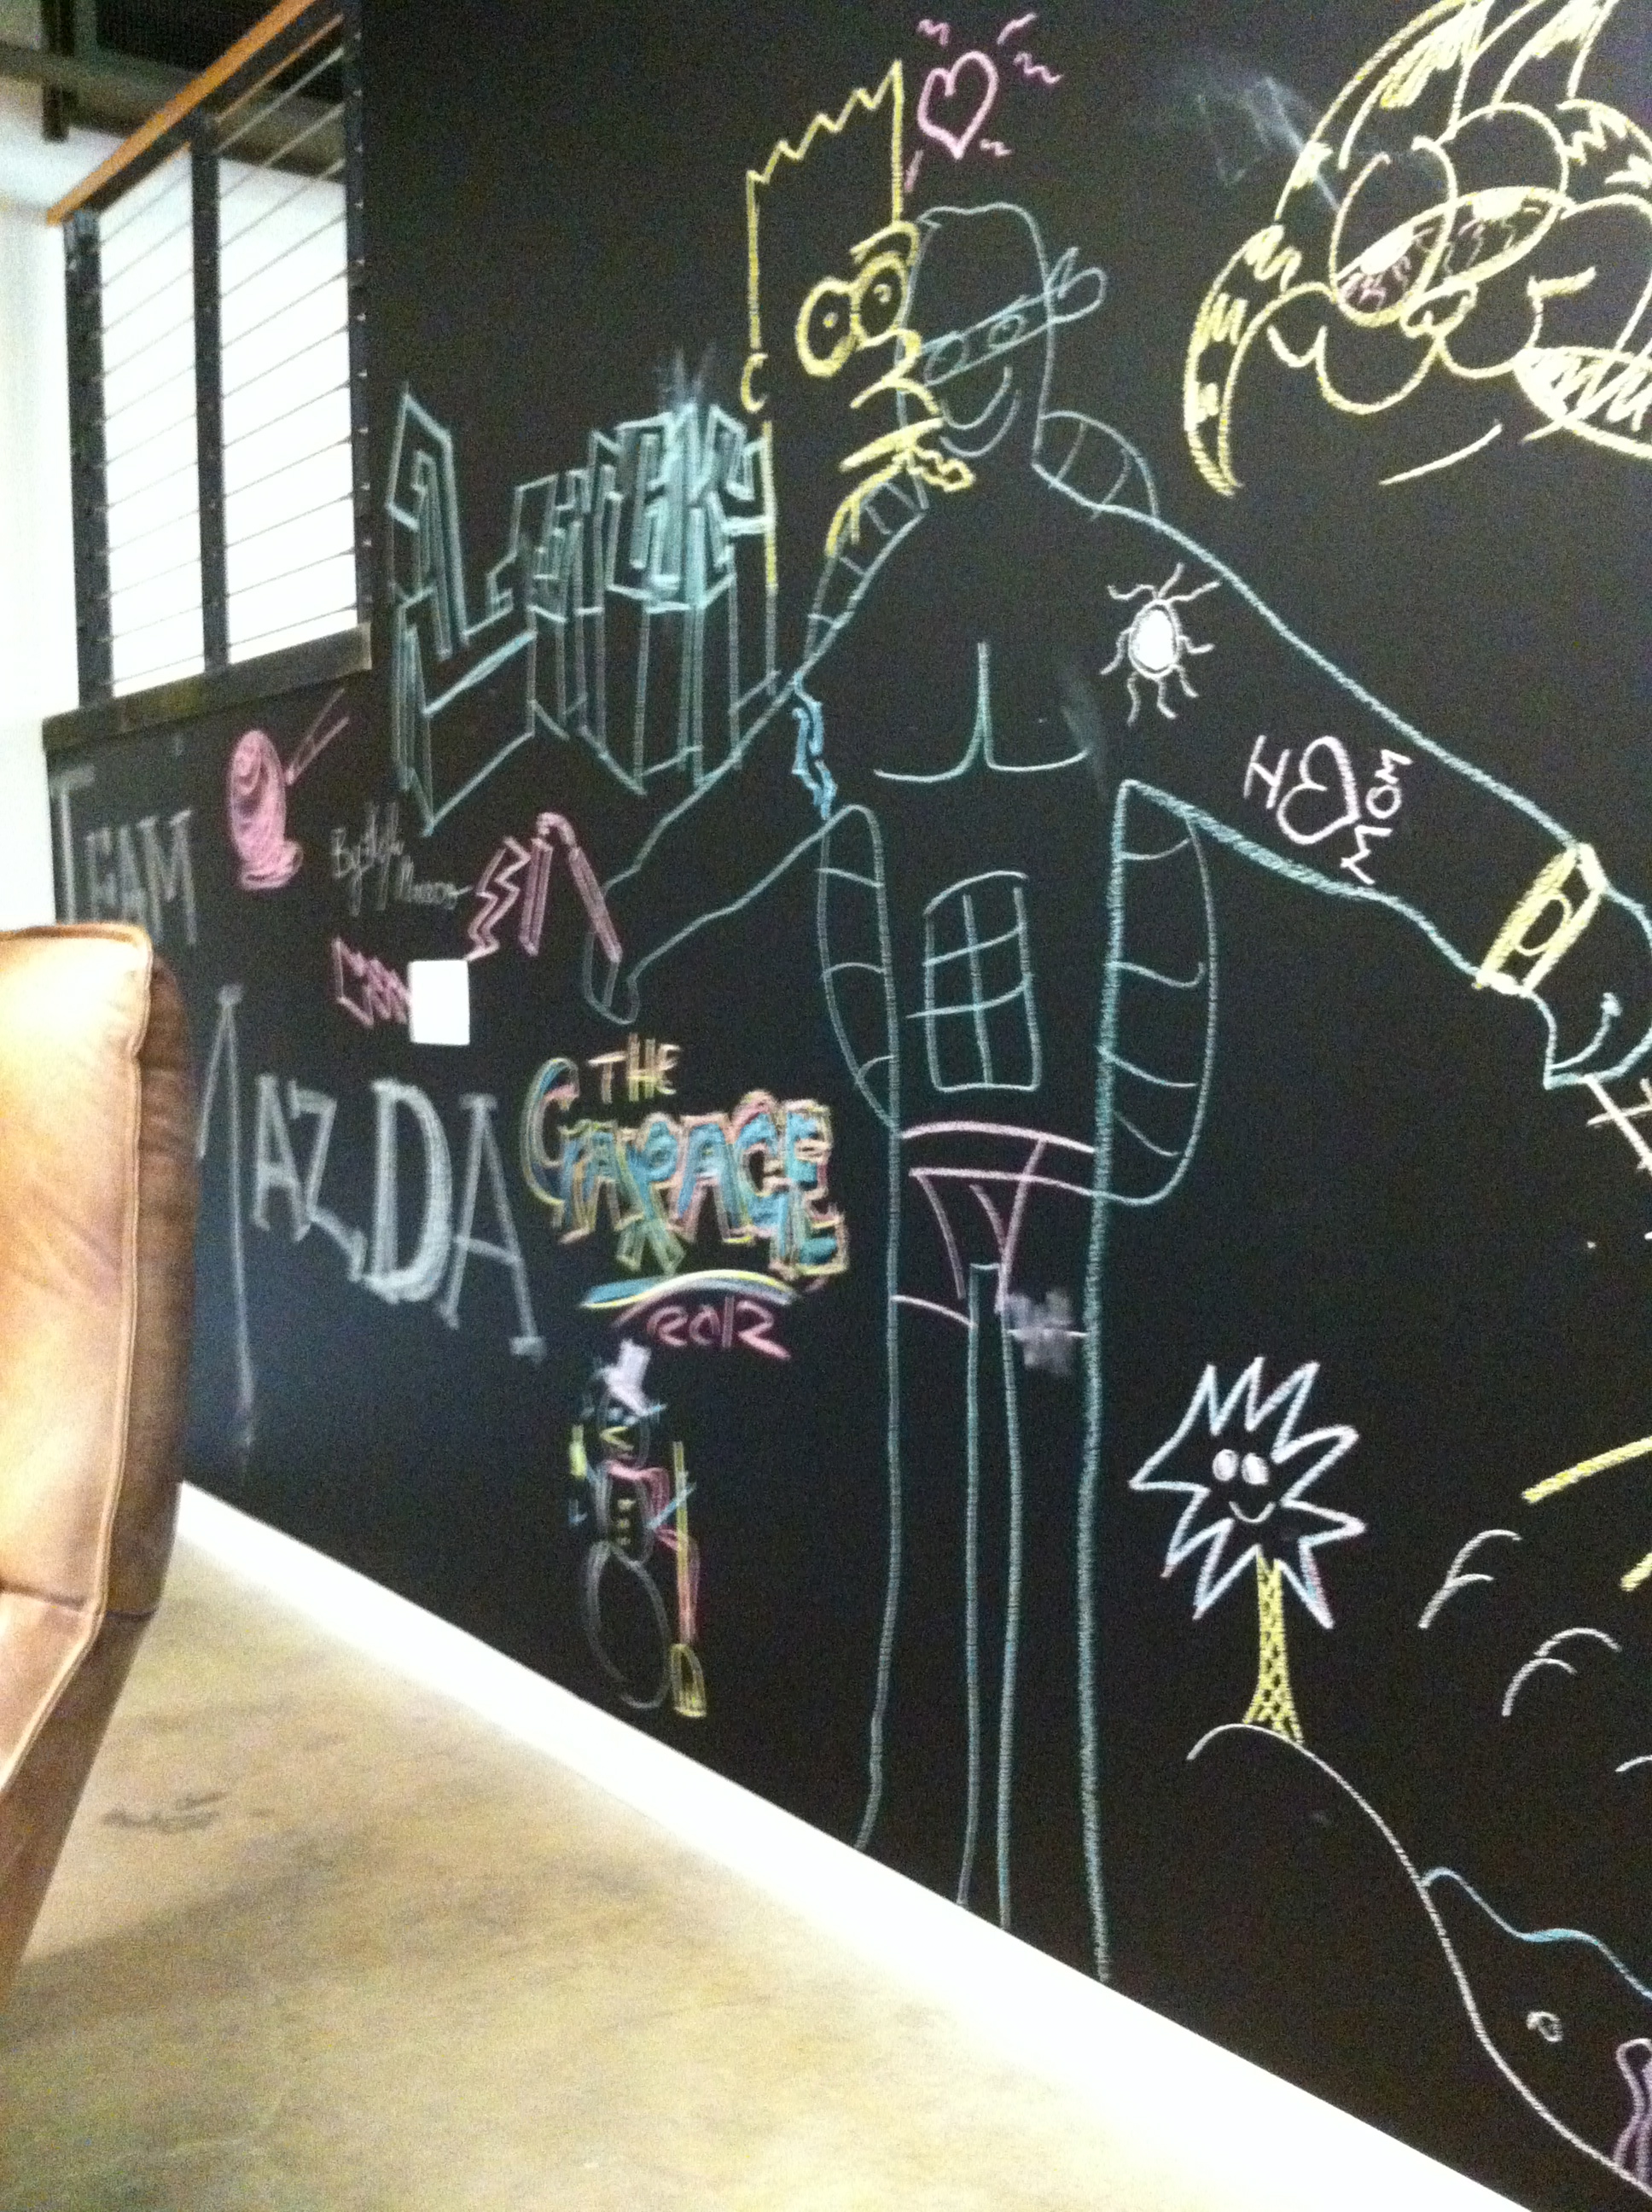 The Chalk Wall @ The Garage